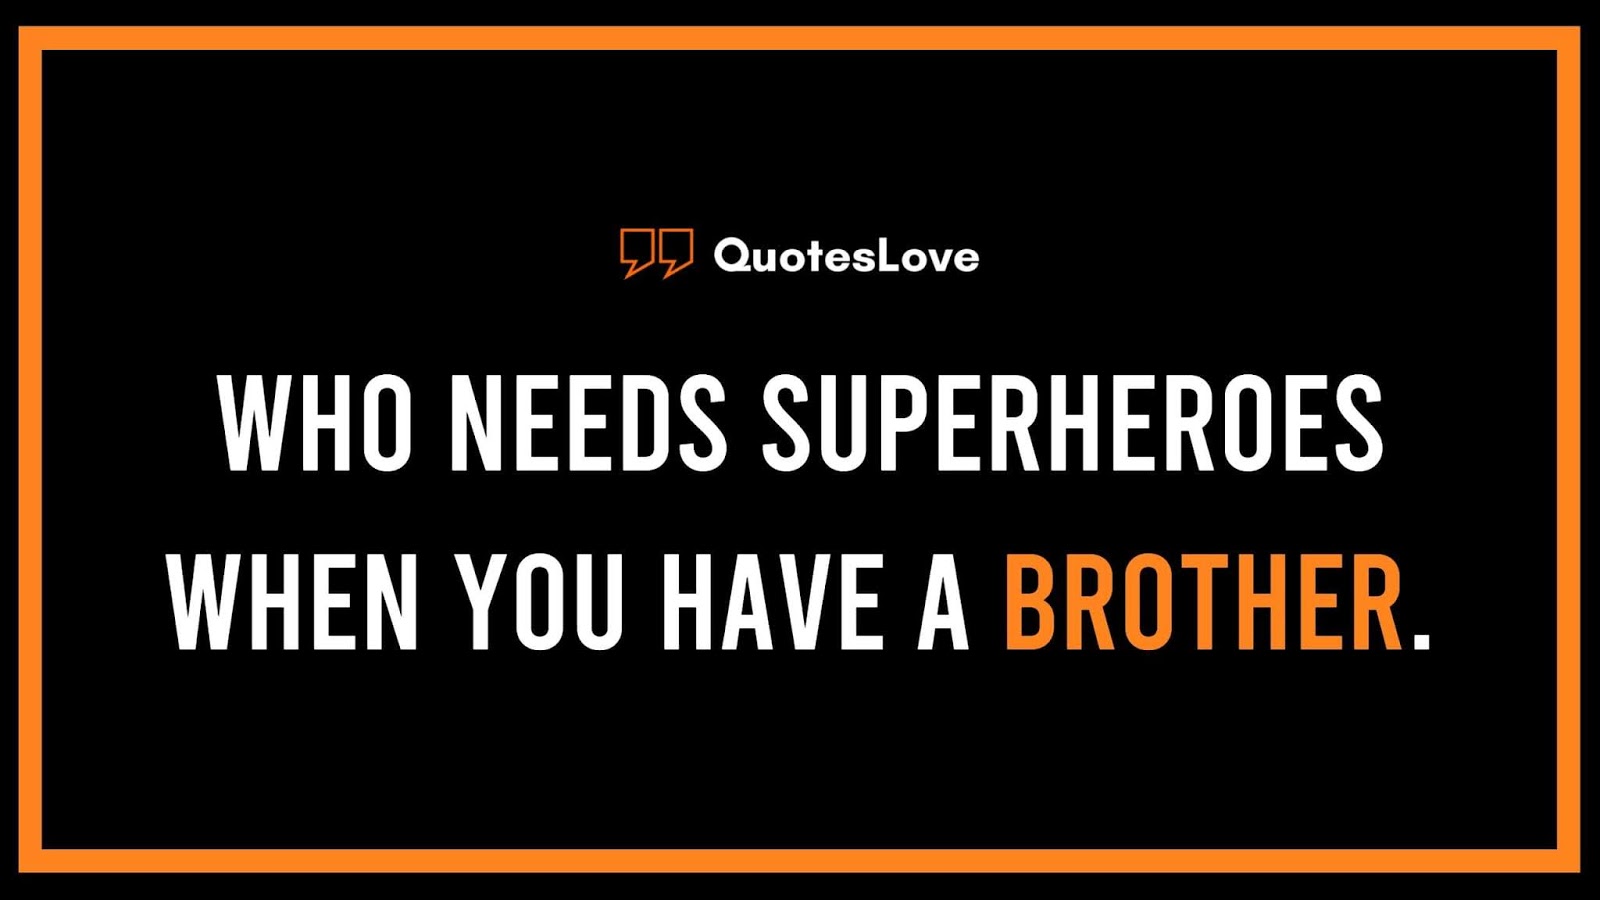 Brother's Day Quotes, Messages, Sayings, Wishes, Greetings, Images, Pictures, Photos, Pictures